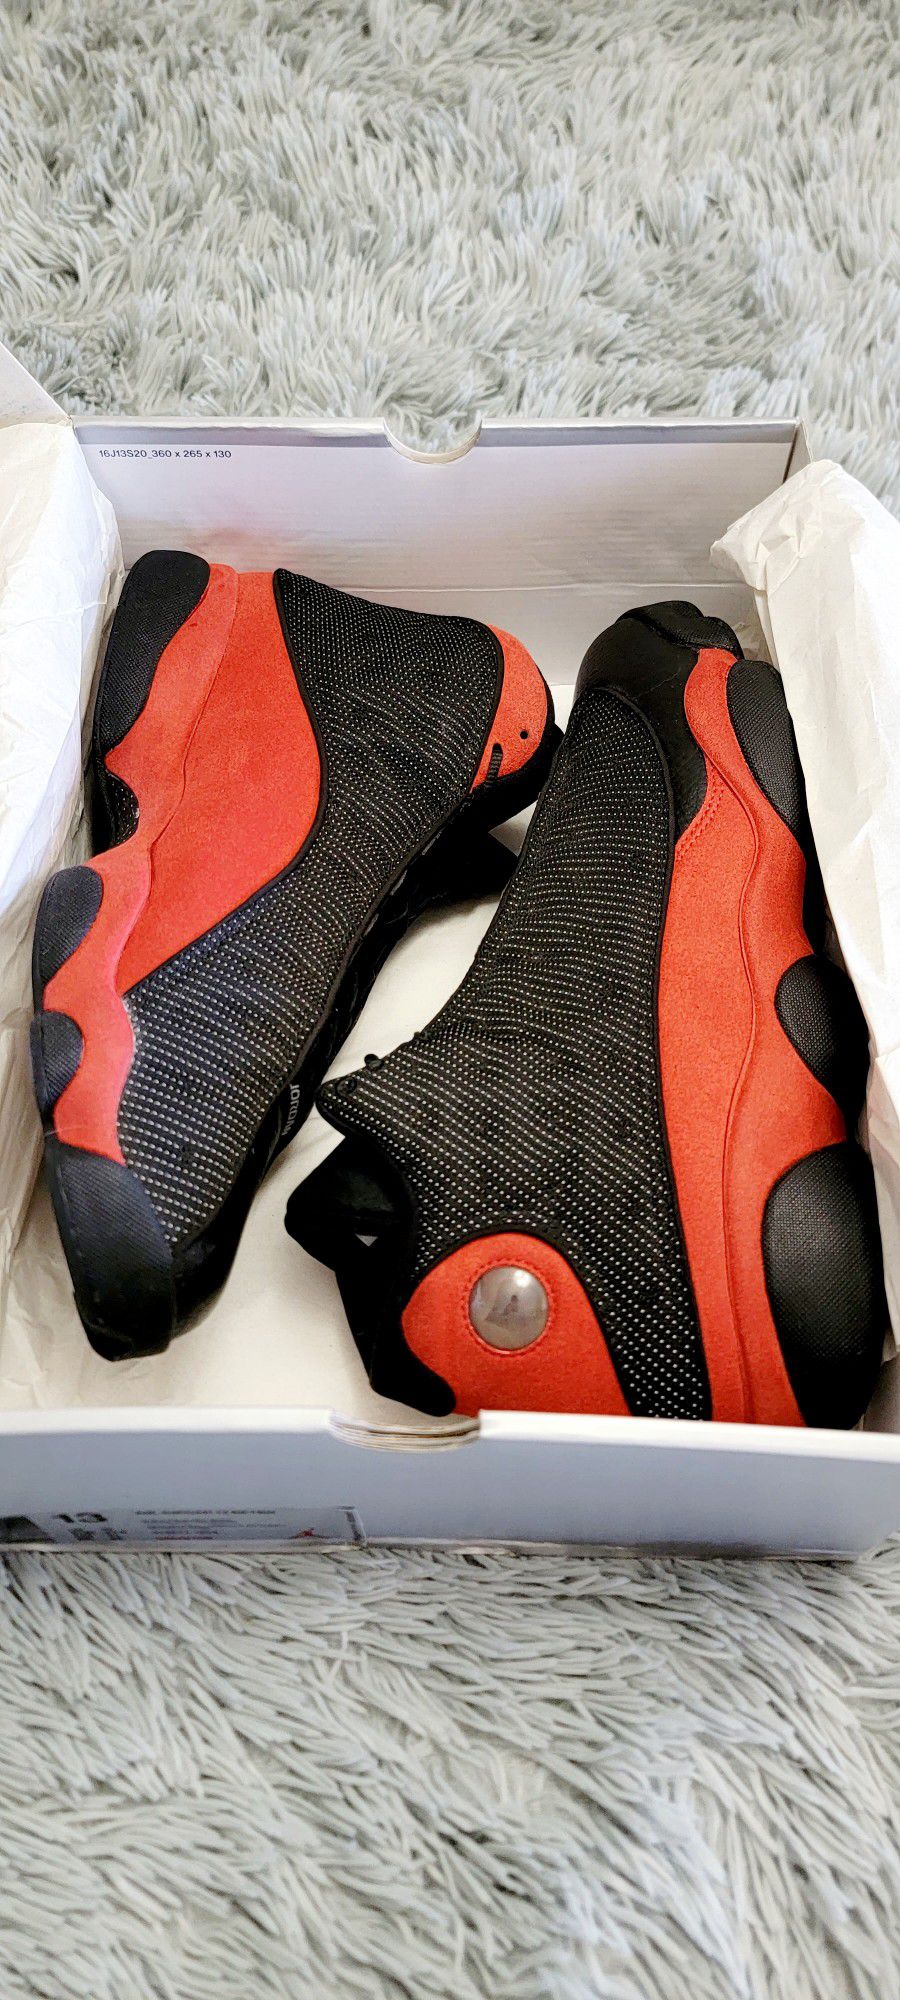 Size 13 Nike Air Jordan XIII Retro Bred 2017 414571-004.
Excellent preowned condition.
